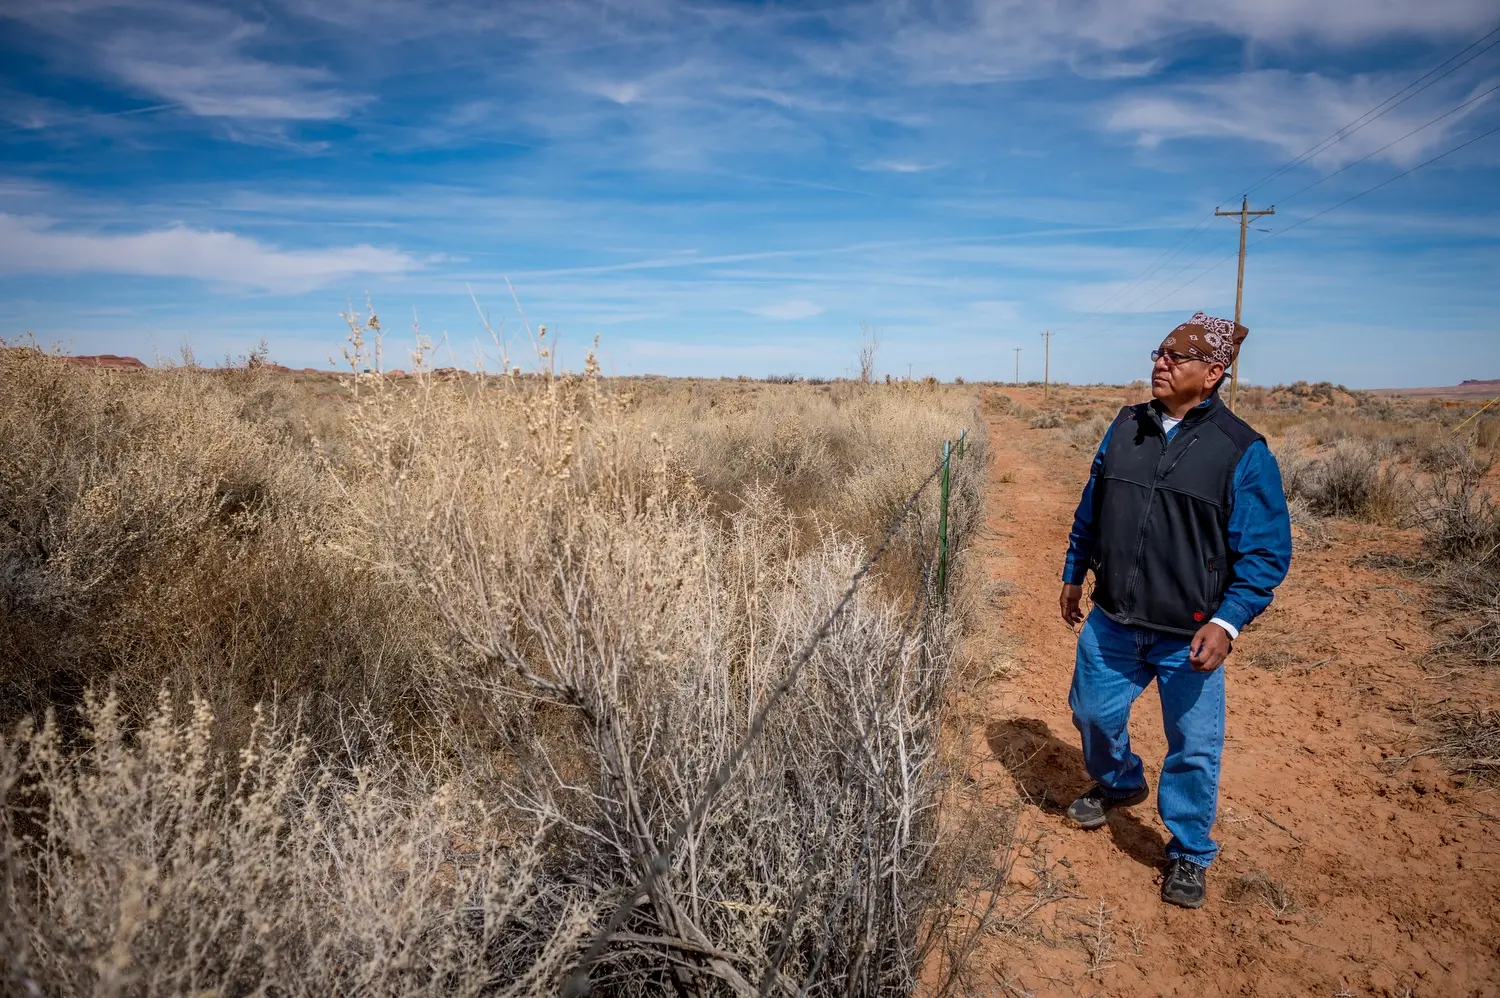 Dariel Yazzie walks along the fence around the covered-uranium tailings pile near his family’s house. Image by Mary F. Calvert. United States, 2020.